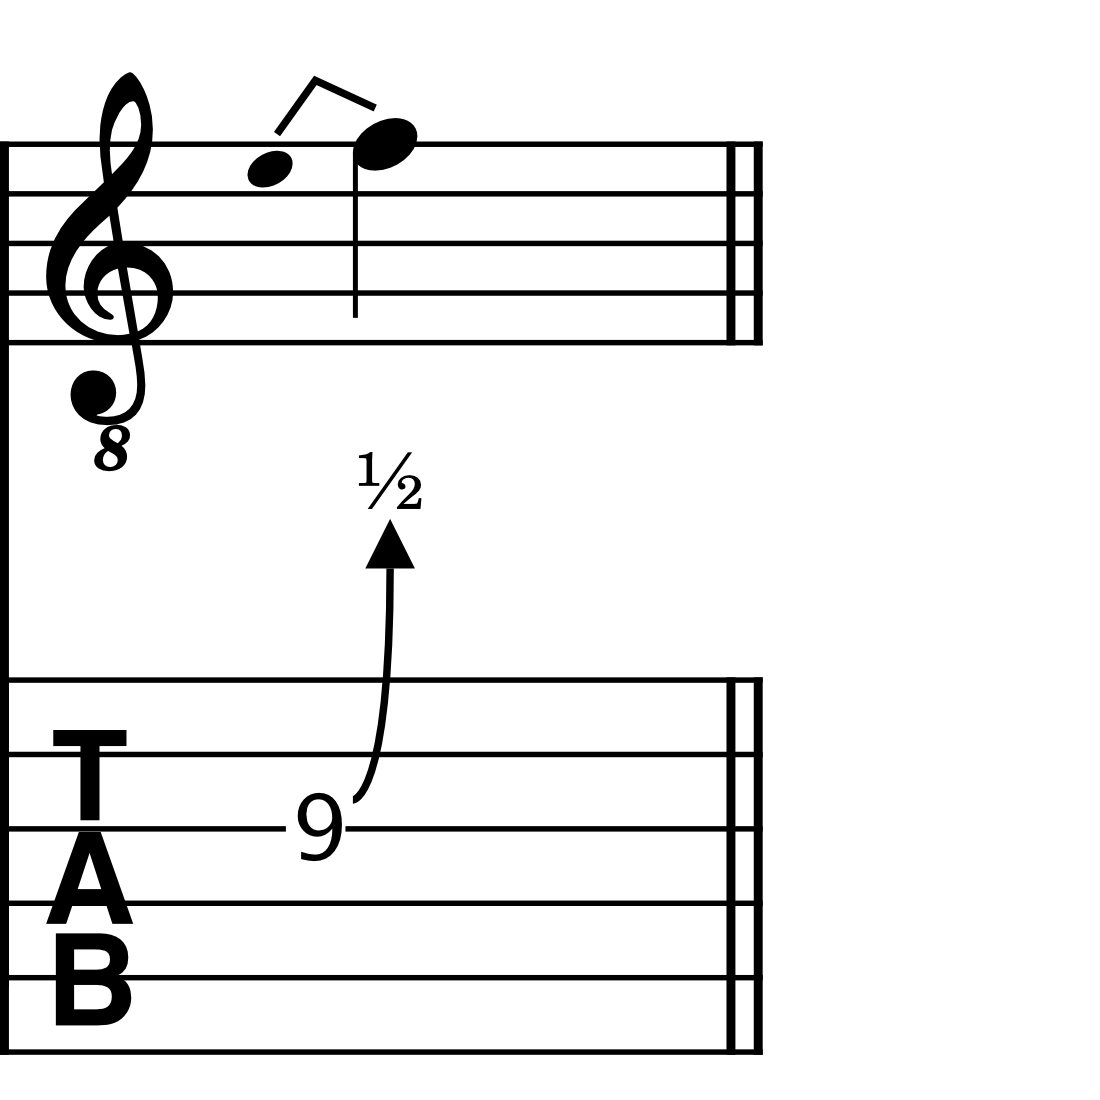 Image of a grace note bend